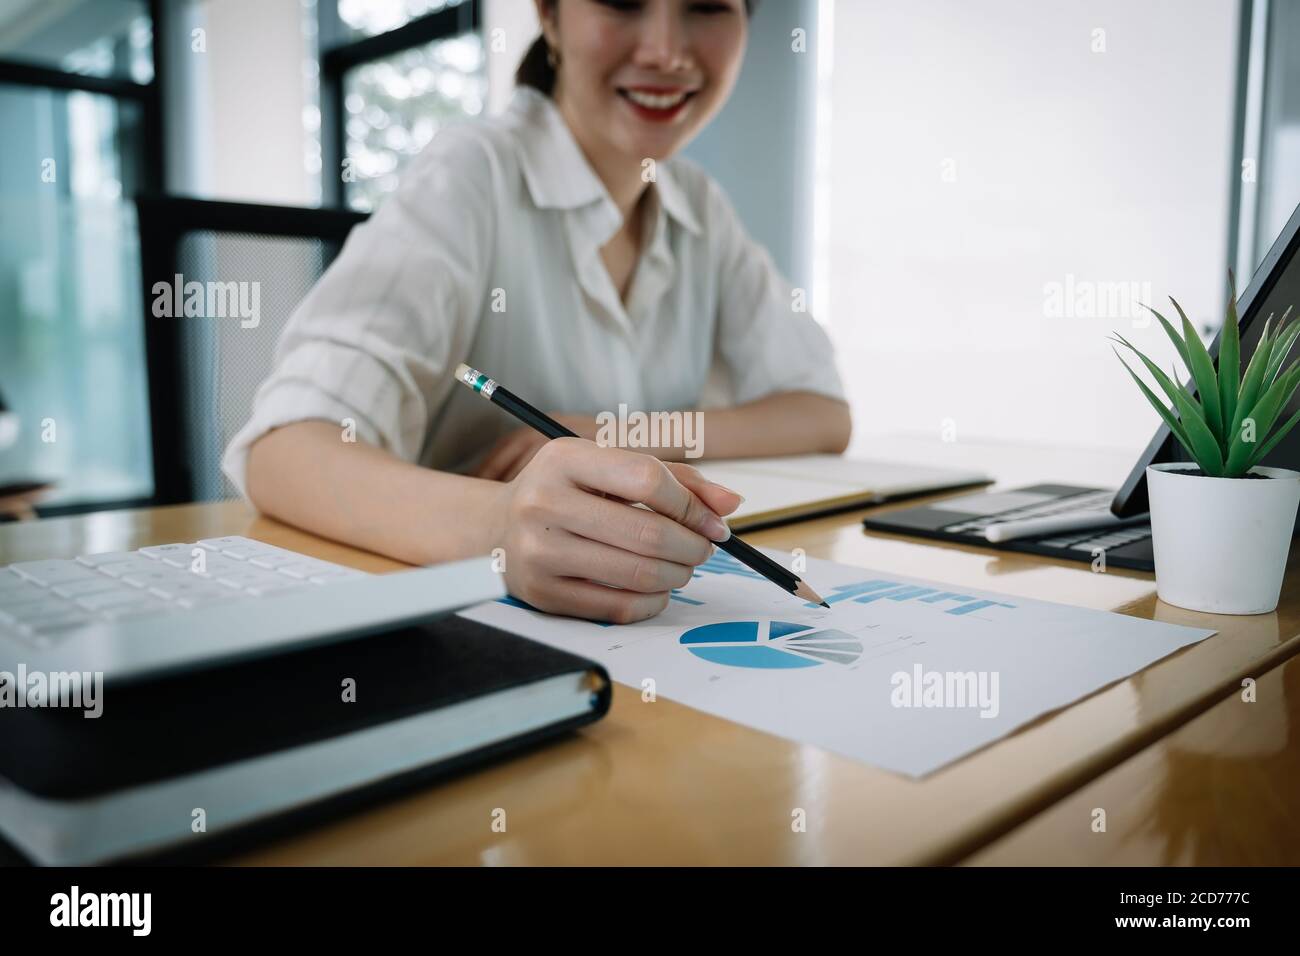 usiness man investment consultant analyzing company annual financial report balance sheet statement working with documents graphs. Concept picture of Stock Photo